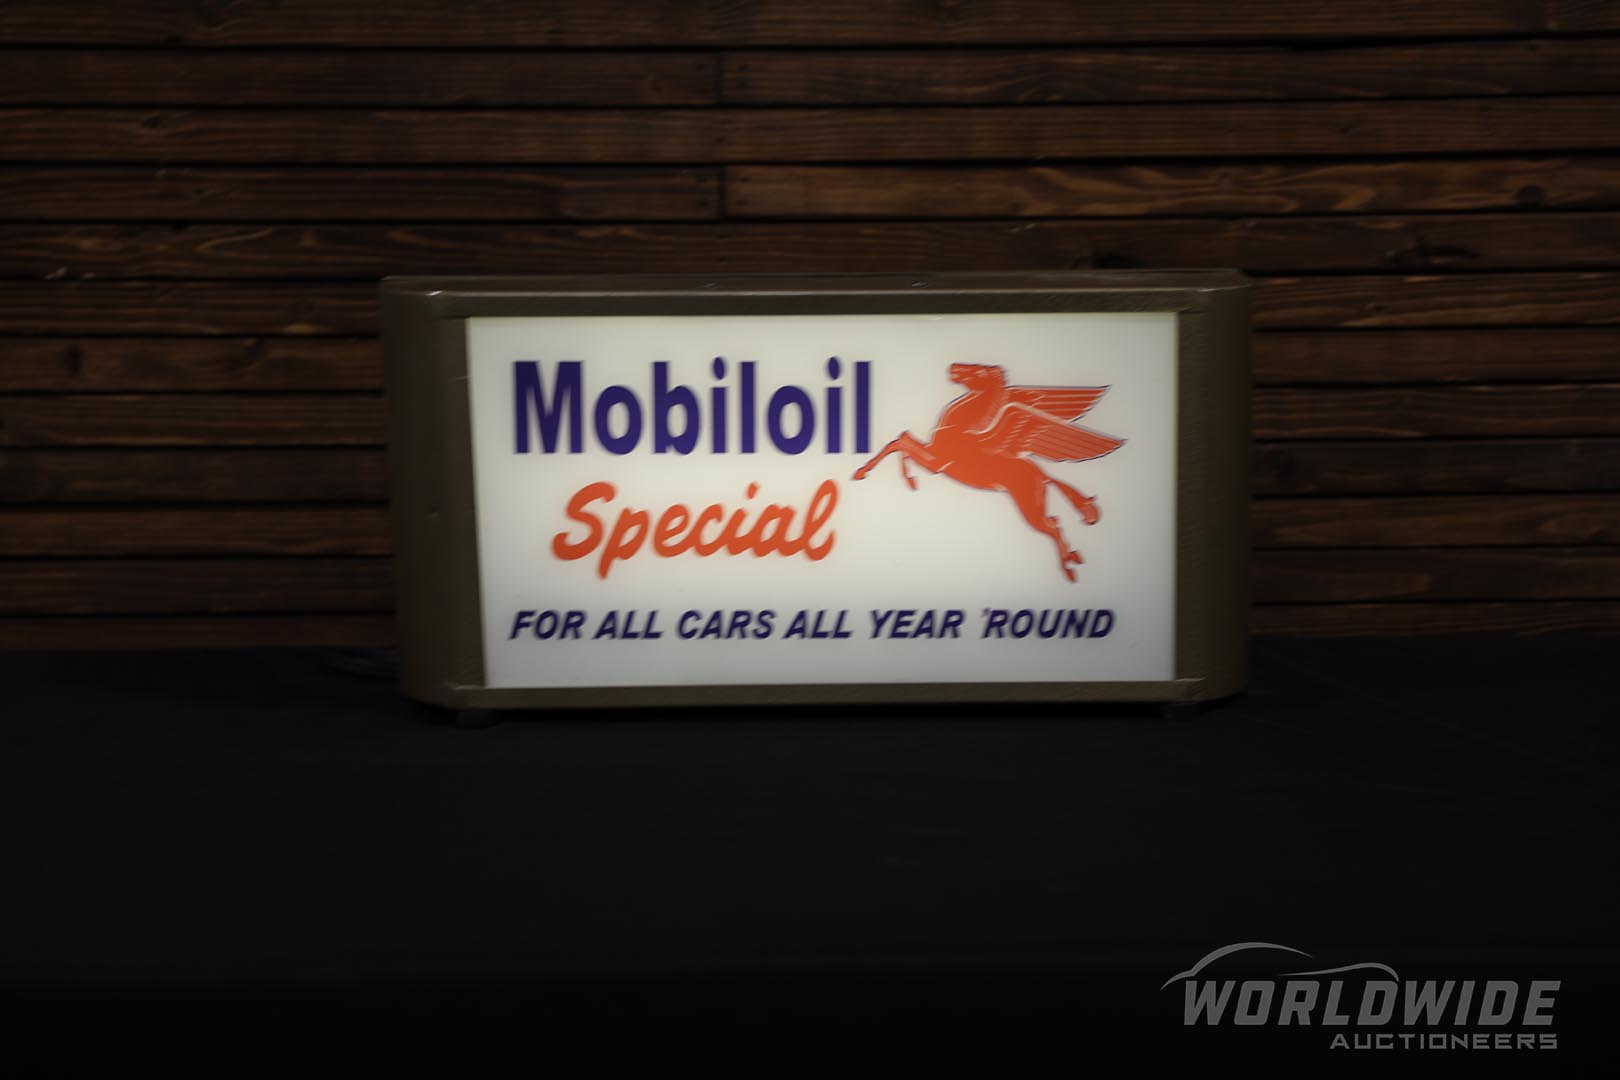 Mobiloil Special for All Cars Lighted Sign